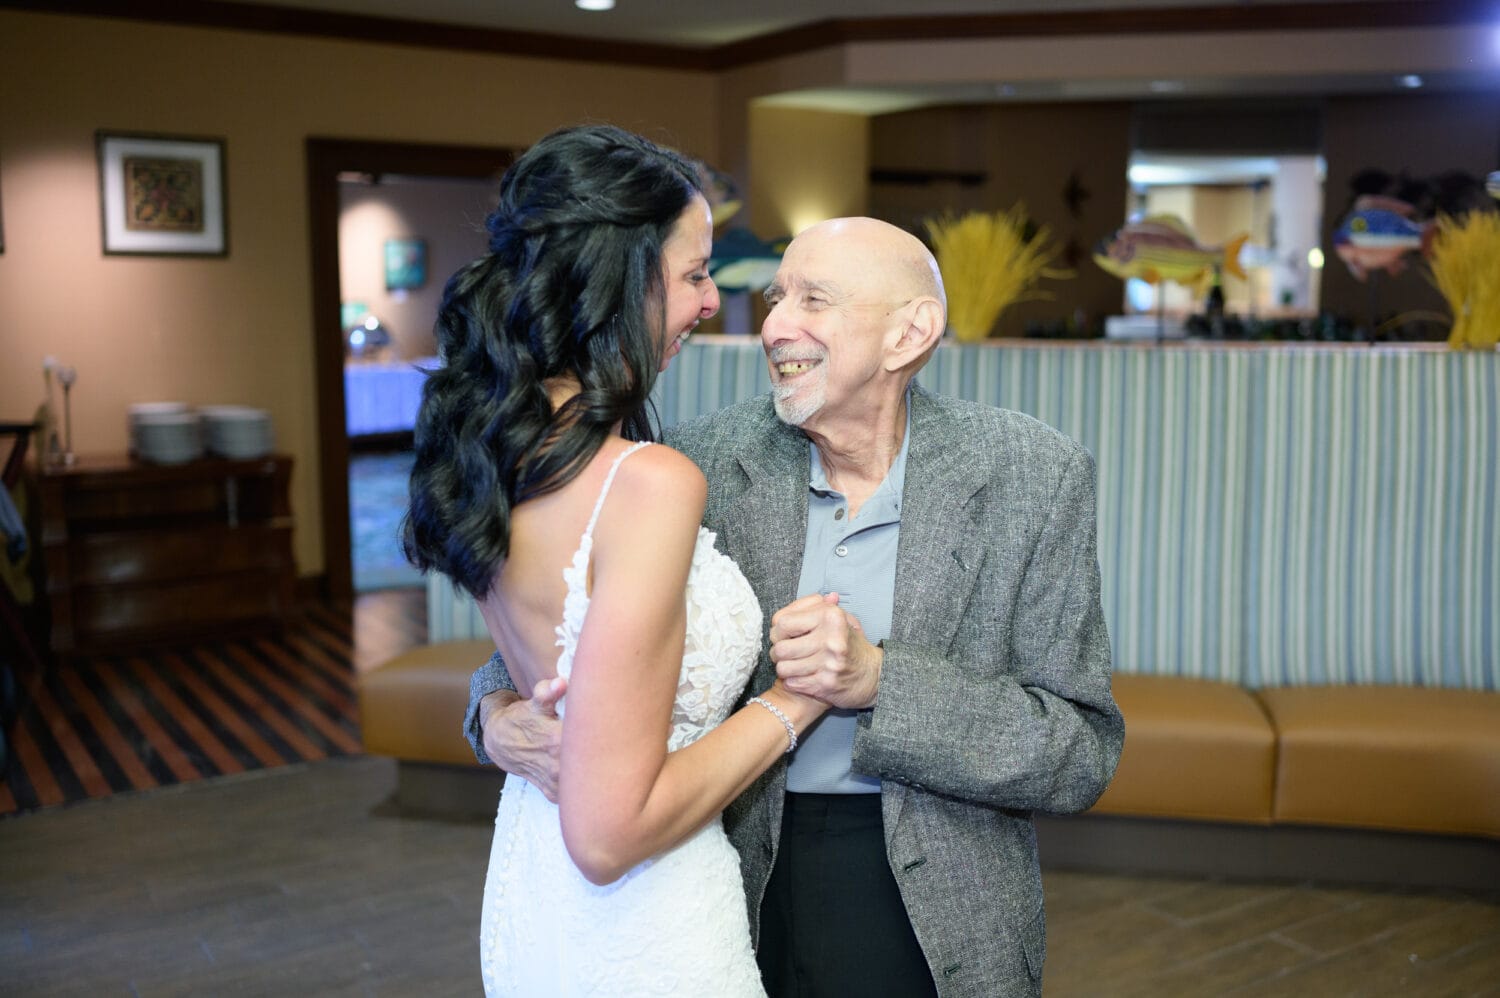 Bride dancing with her father - The Marina Inn